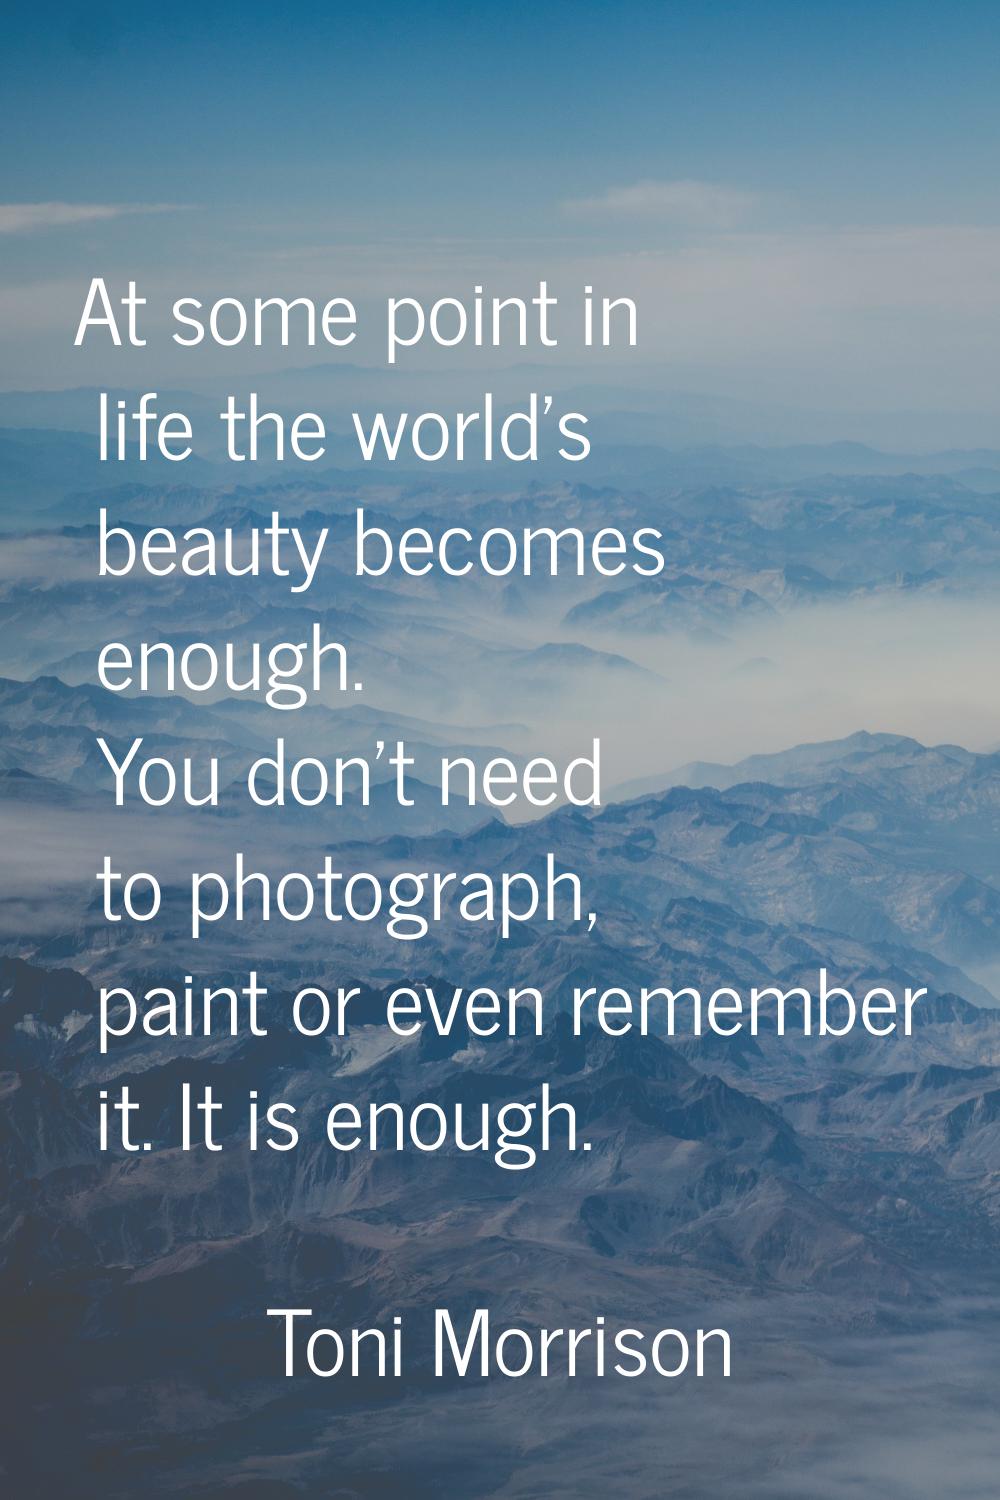 At some point in life the world's beauty becomes enough. You don't need to photograph, paint or eve